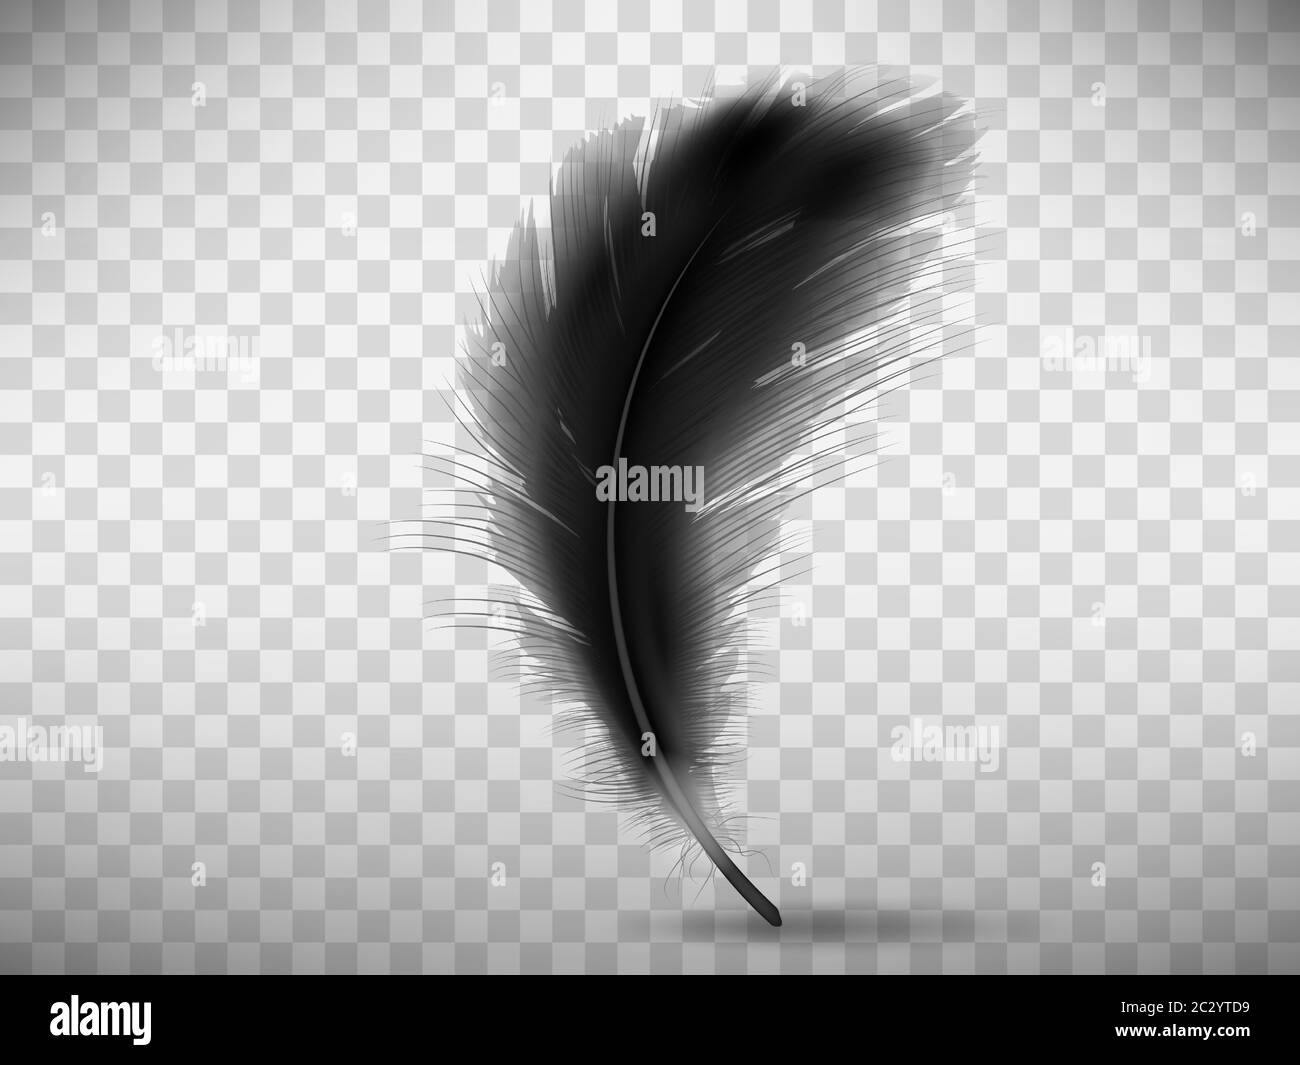 Black fluffy feather with shadow vector realistic illustration, isolated on transparent background. Feather from wing of bird or fallen angel, symbol Stock Vector